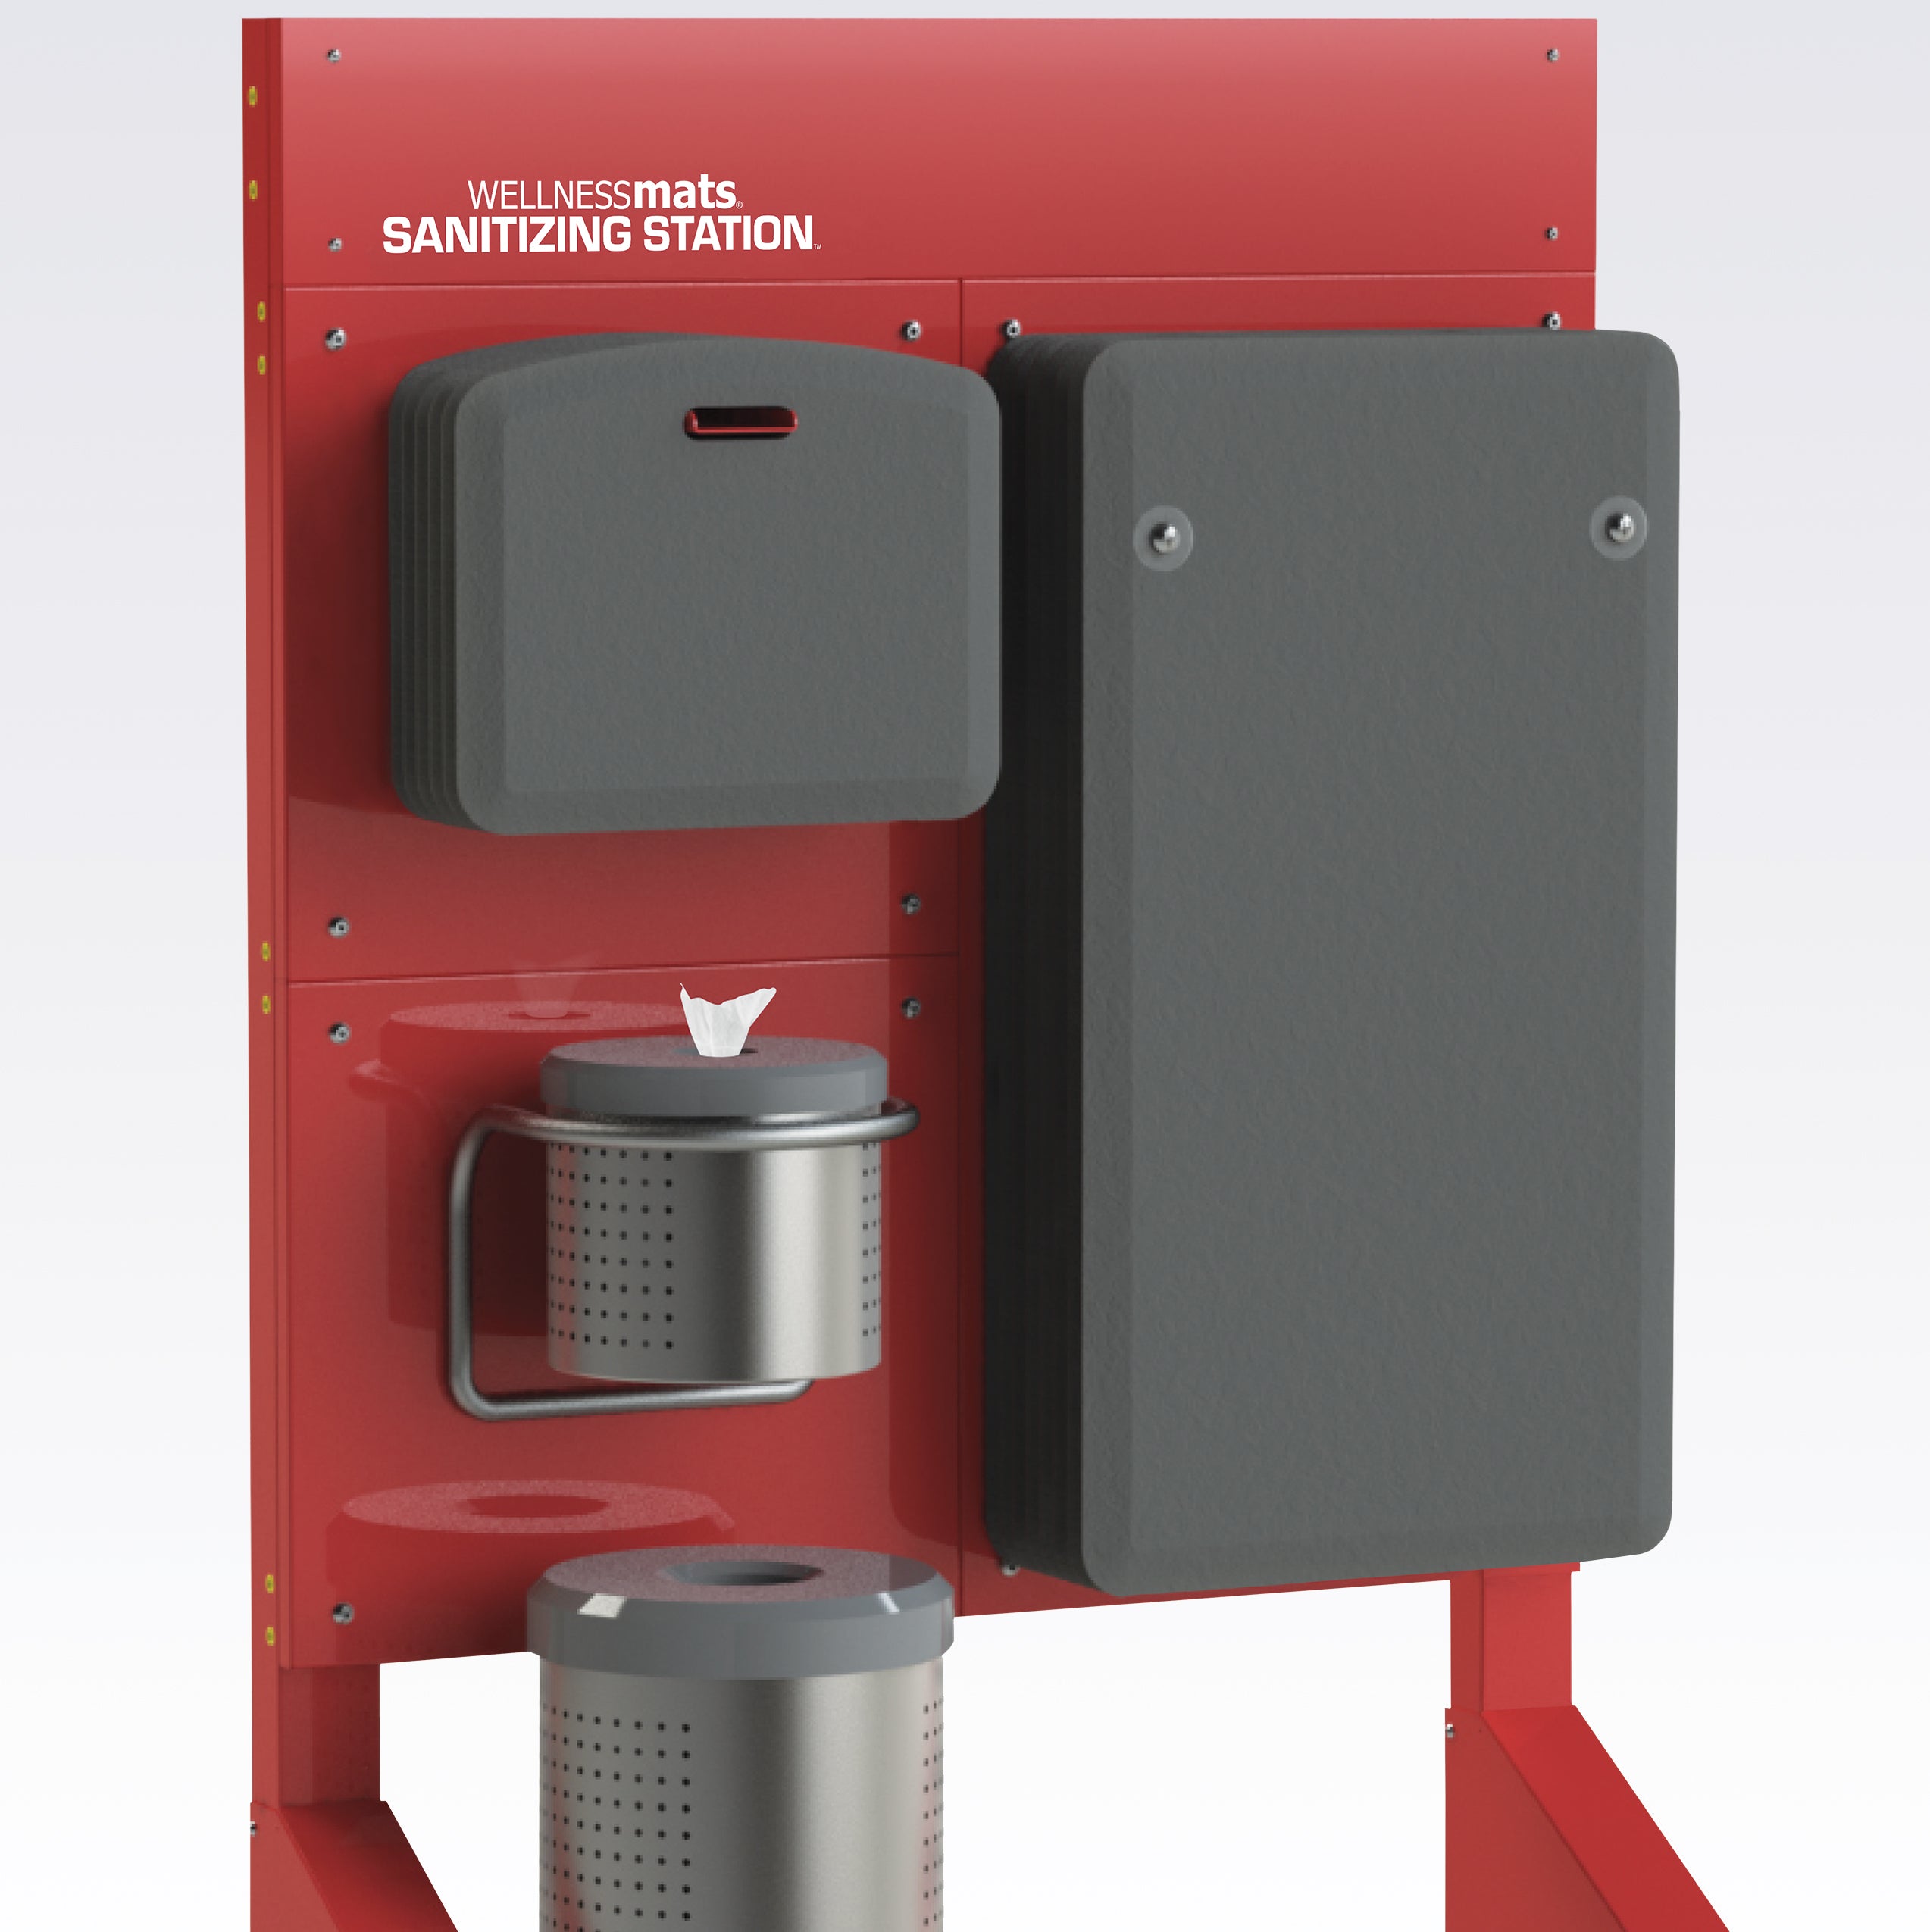 Picture of red WellnessMats Sanitizing Station.